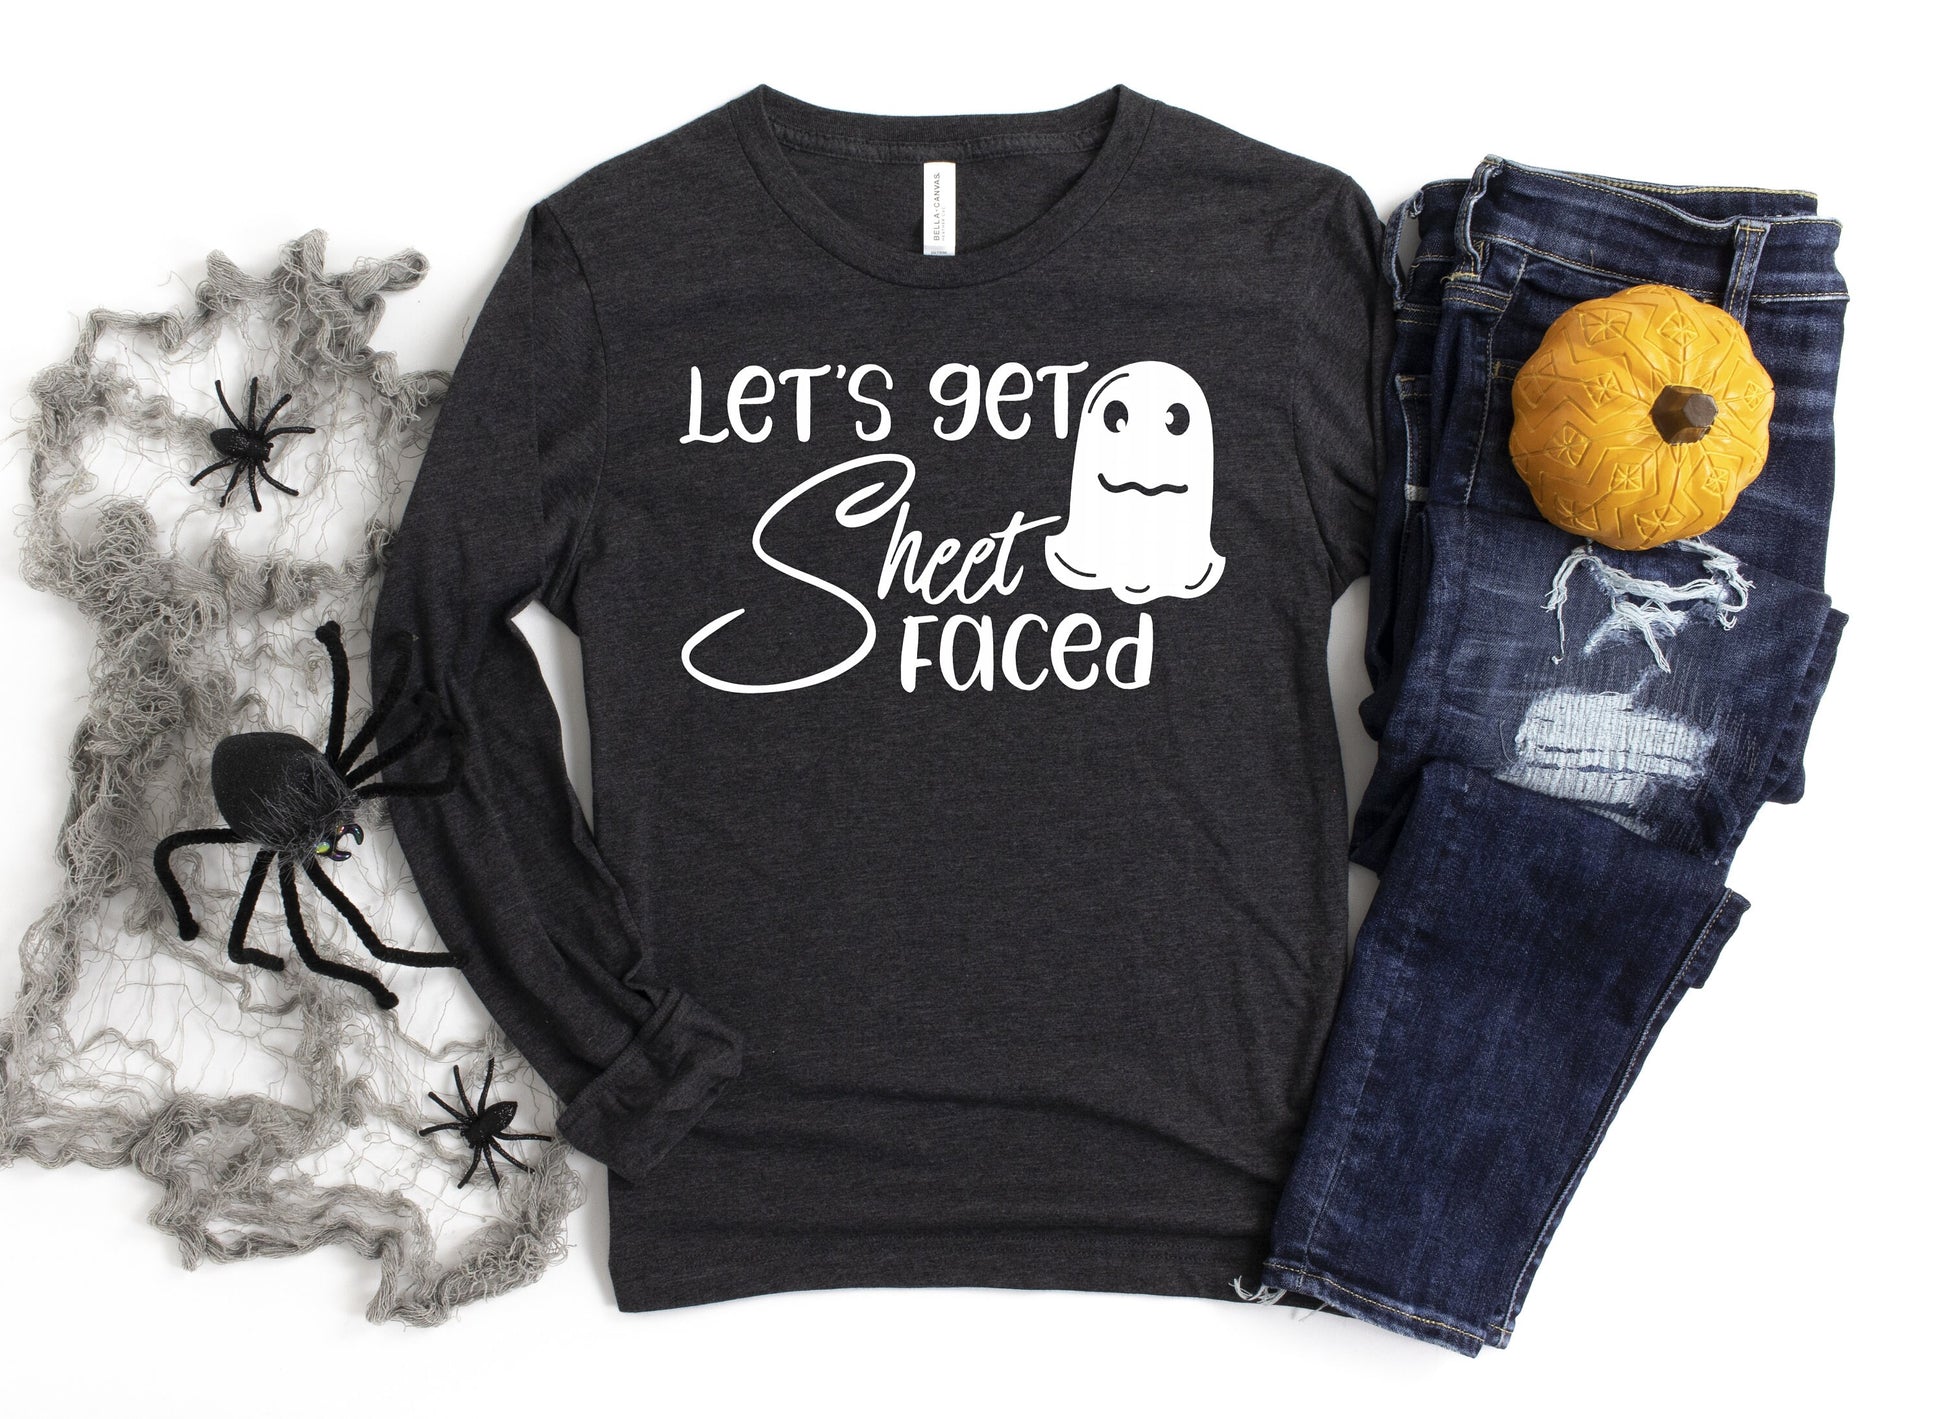 Let's Get Sheet Faced long sleeve t-shirt, trick or treating shirt, halloween party shirt